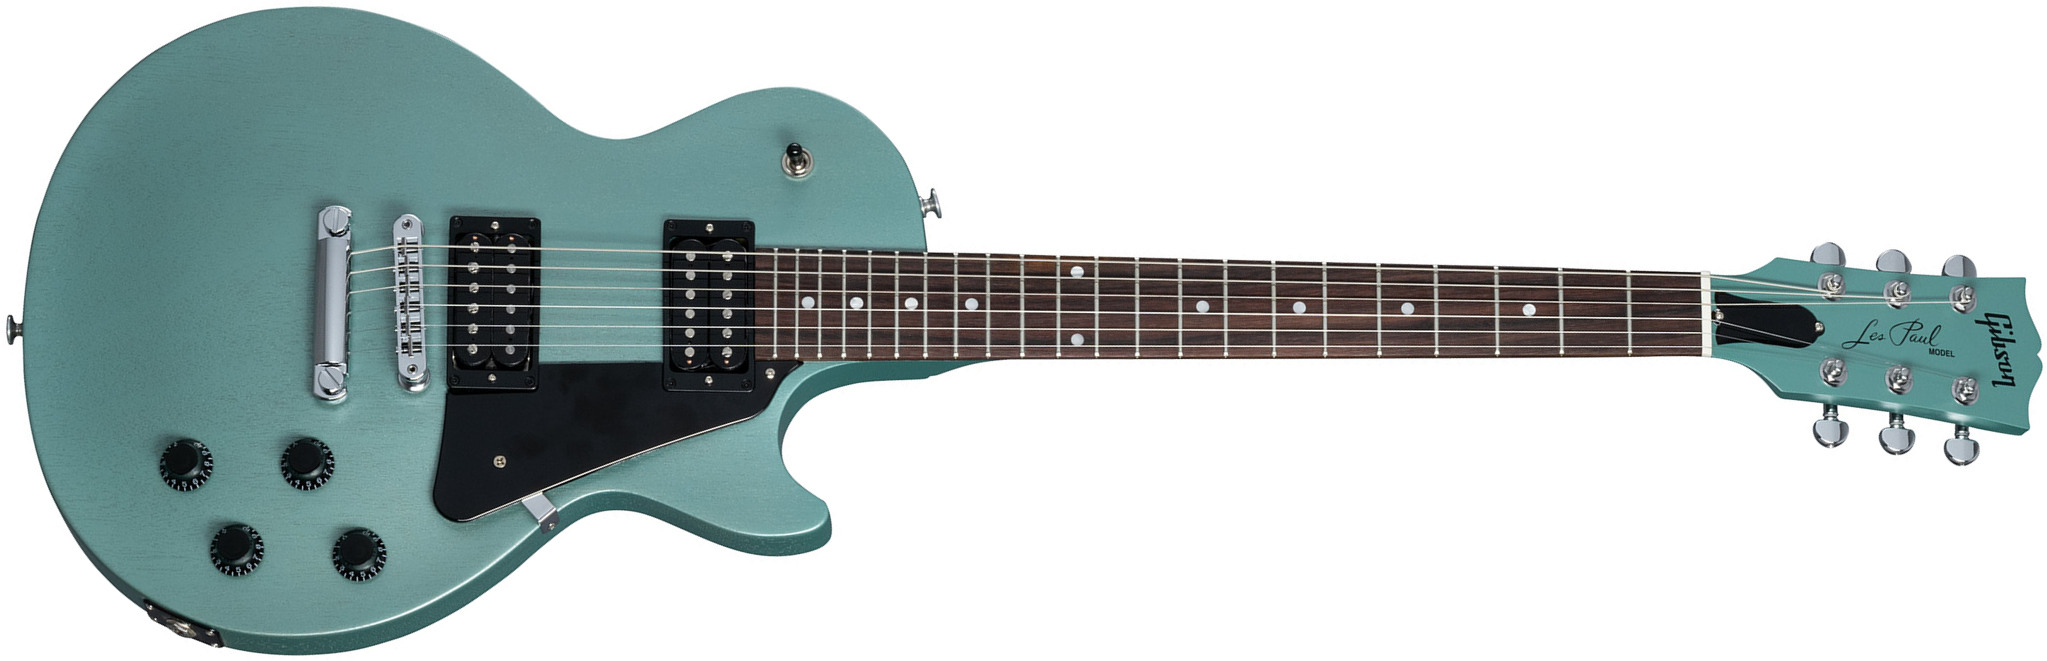 Gibson Les Paul Modern Lite 2h Ht Rw - Satin Inverness Green - Single cut electric guitar - Main picture